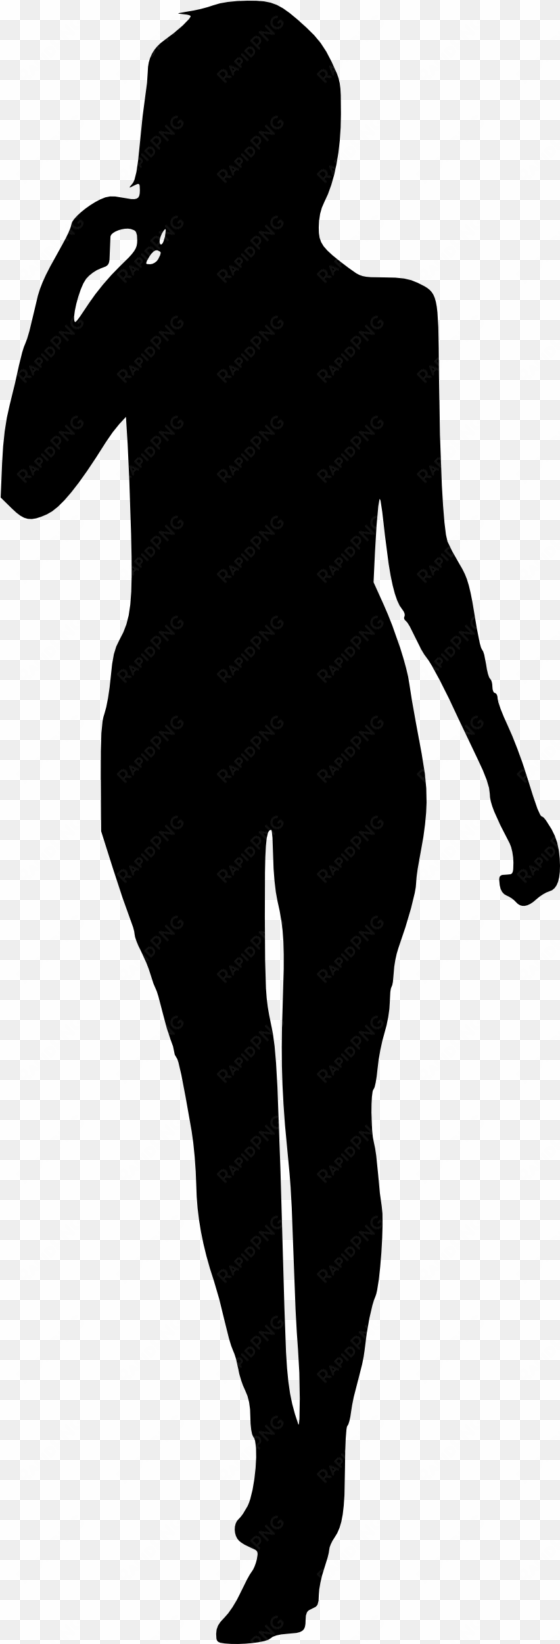 free download - silhouette of a woman png